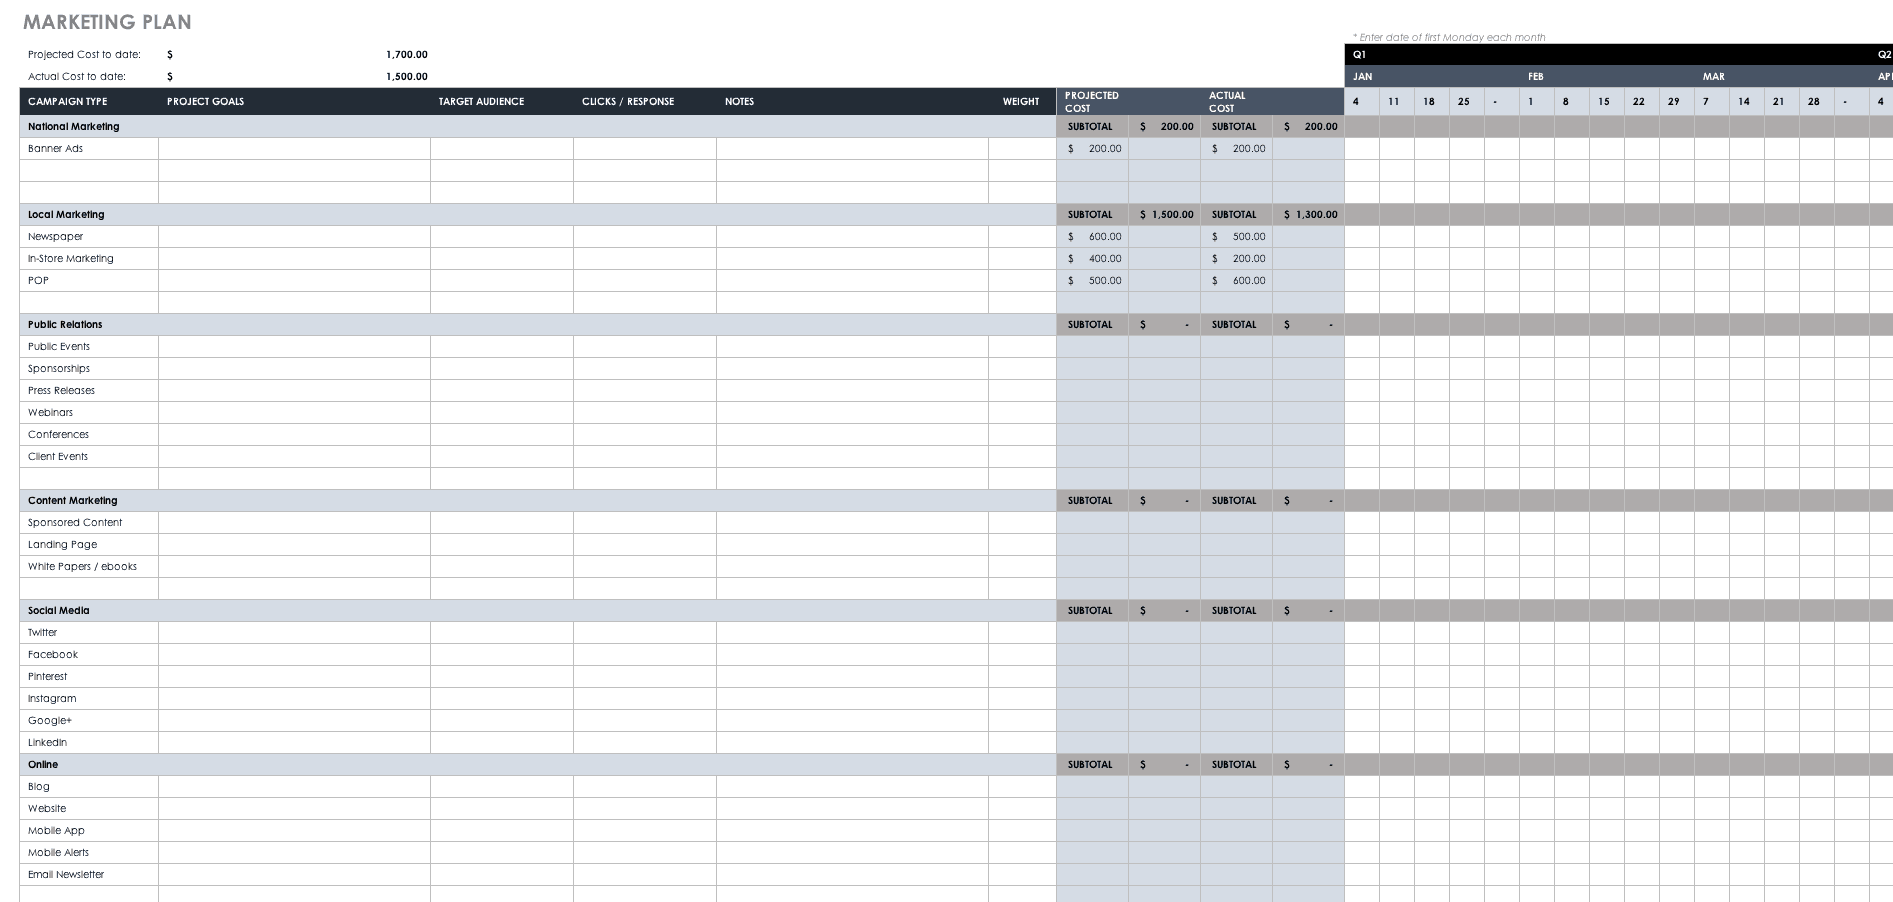 Marketing And Communications Plan Template from www.smartsheet.com